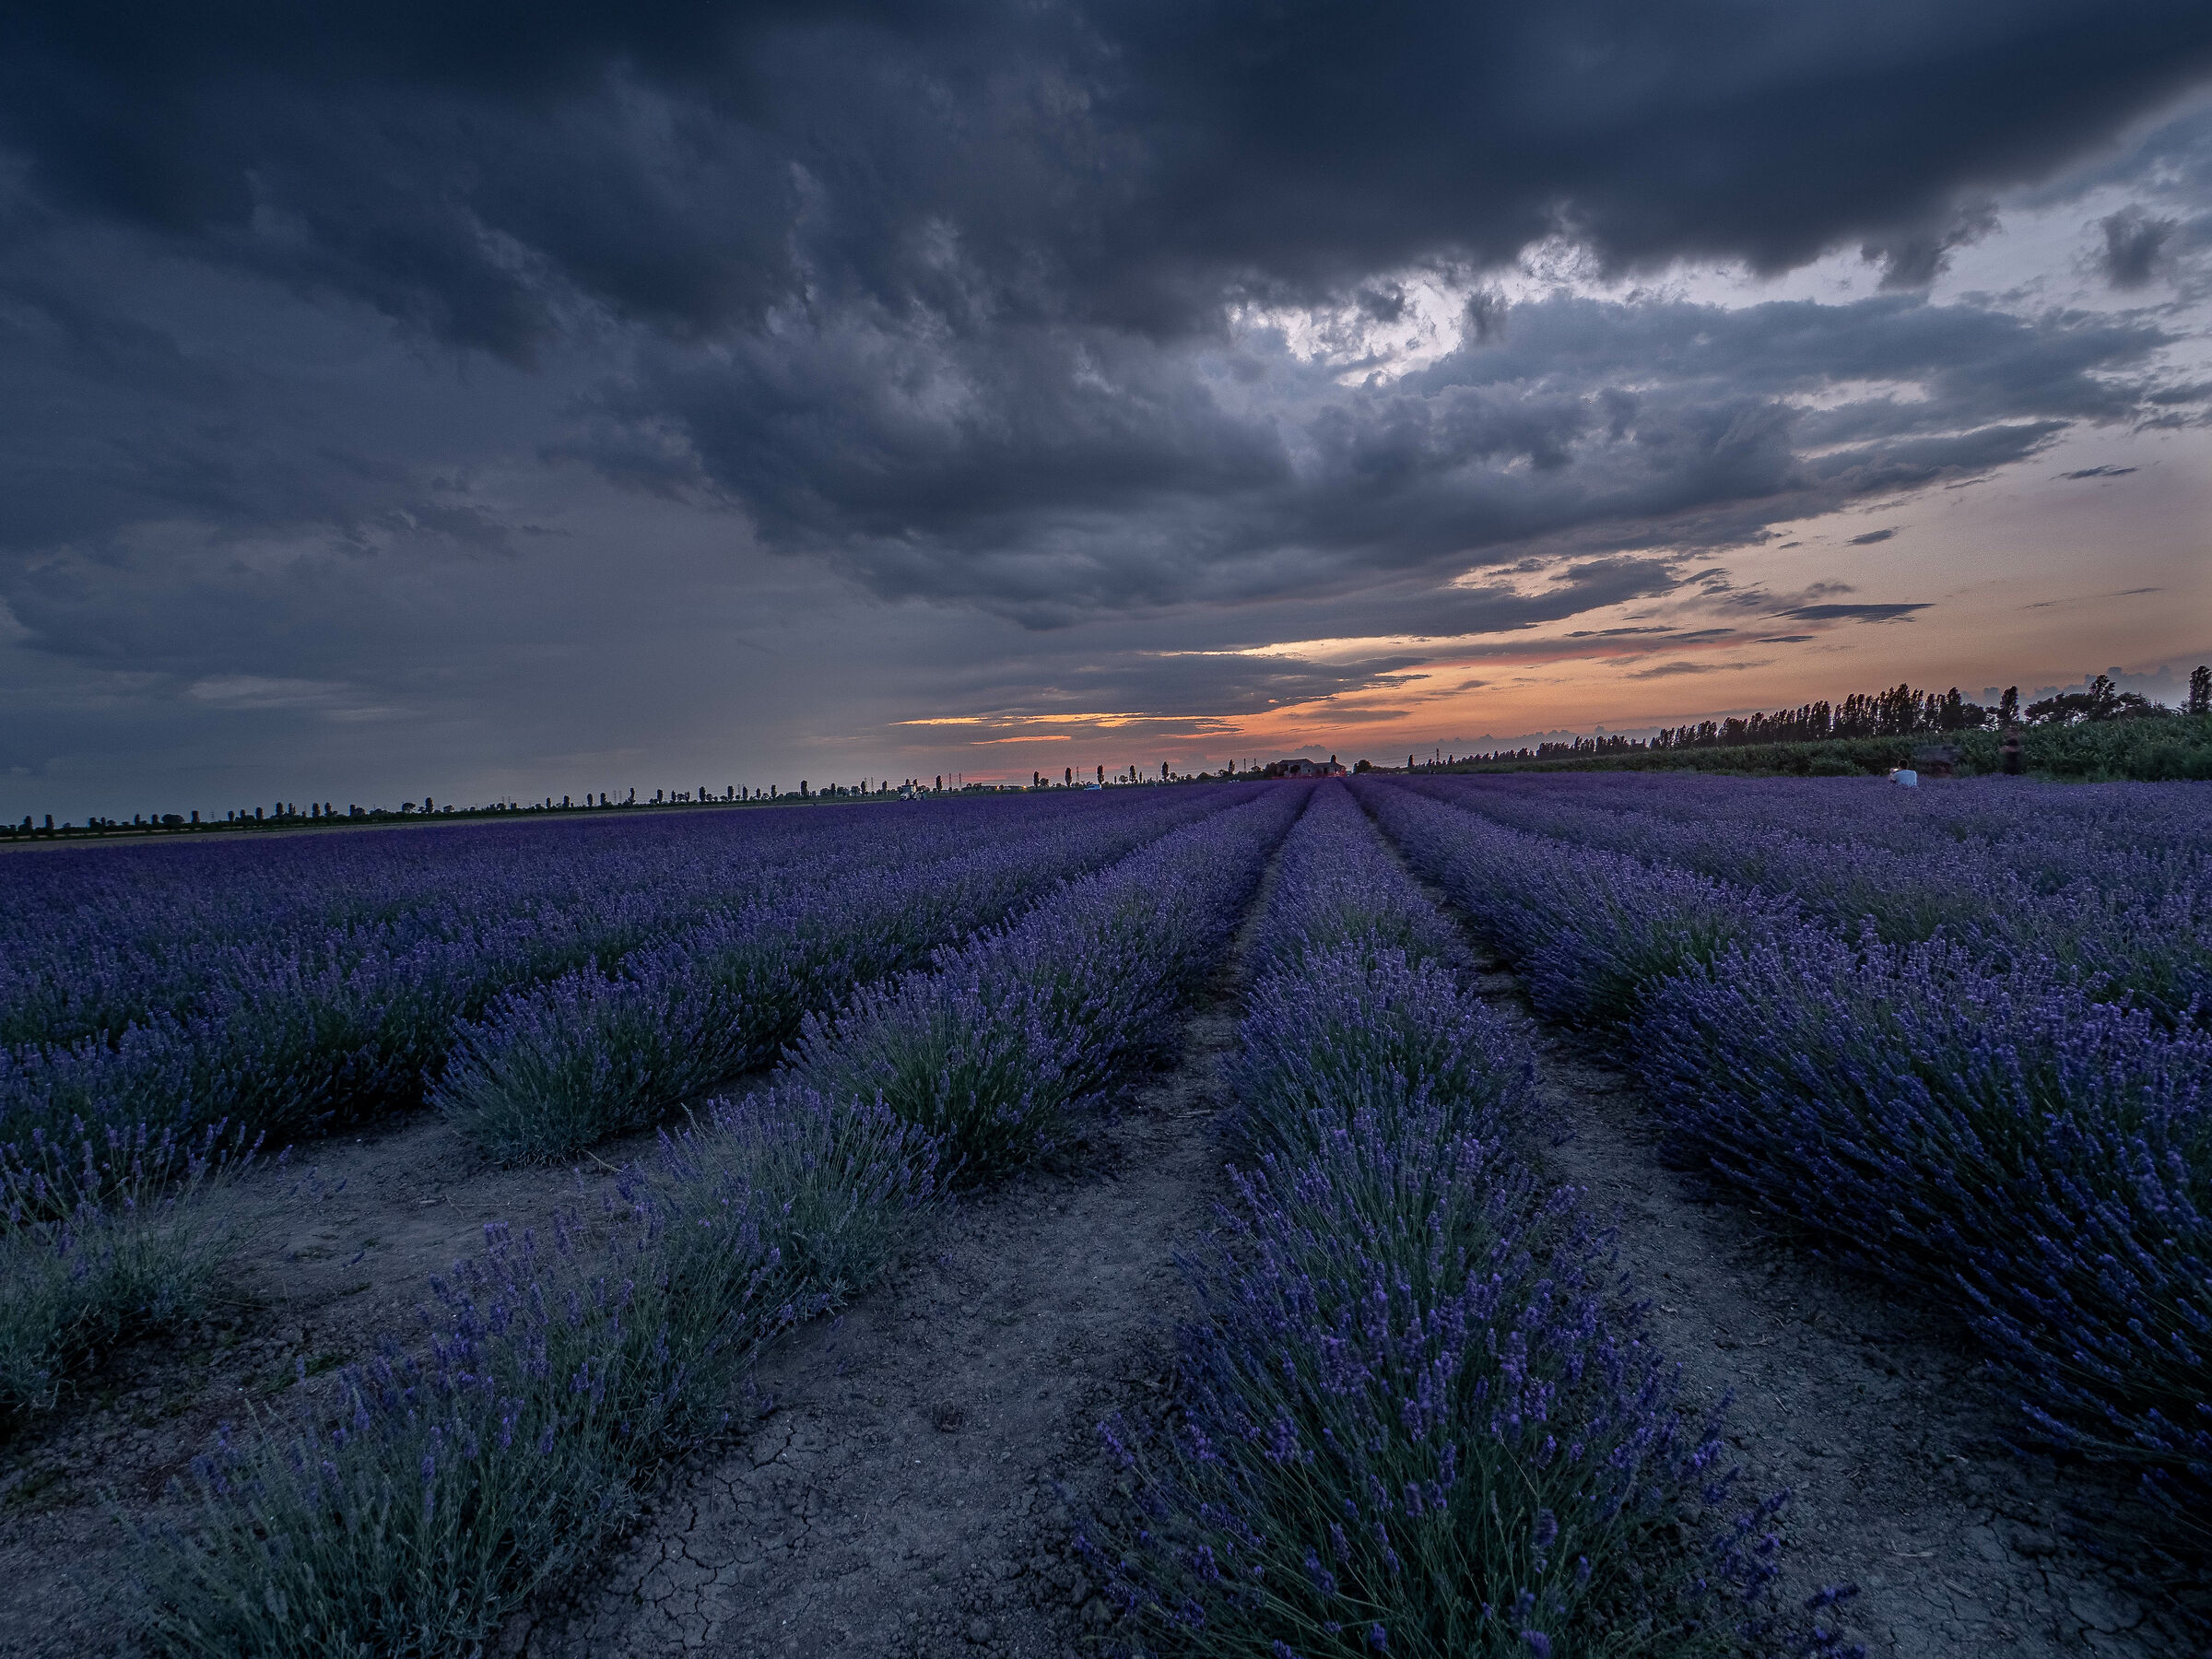 Italy's most famous lavender field...